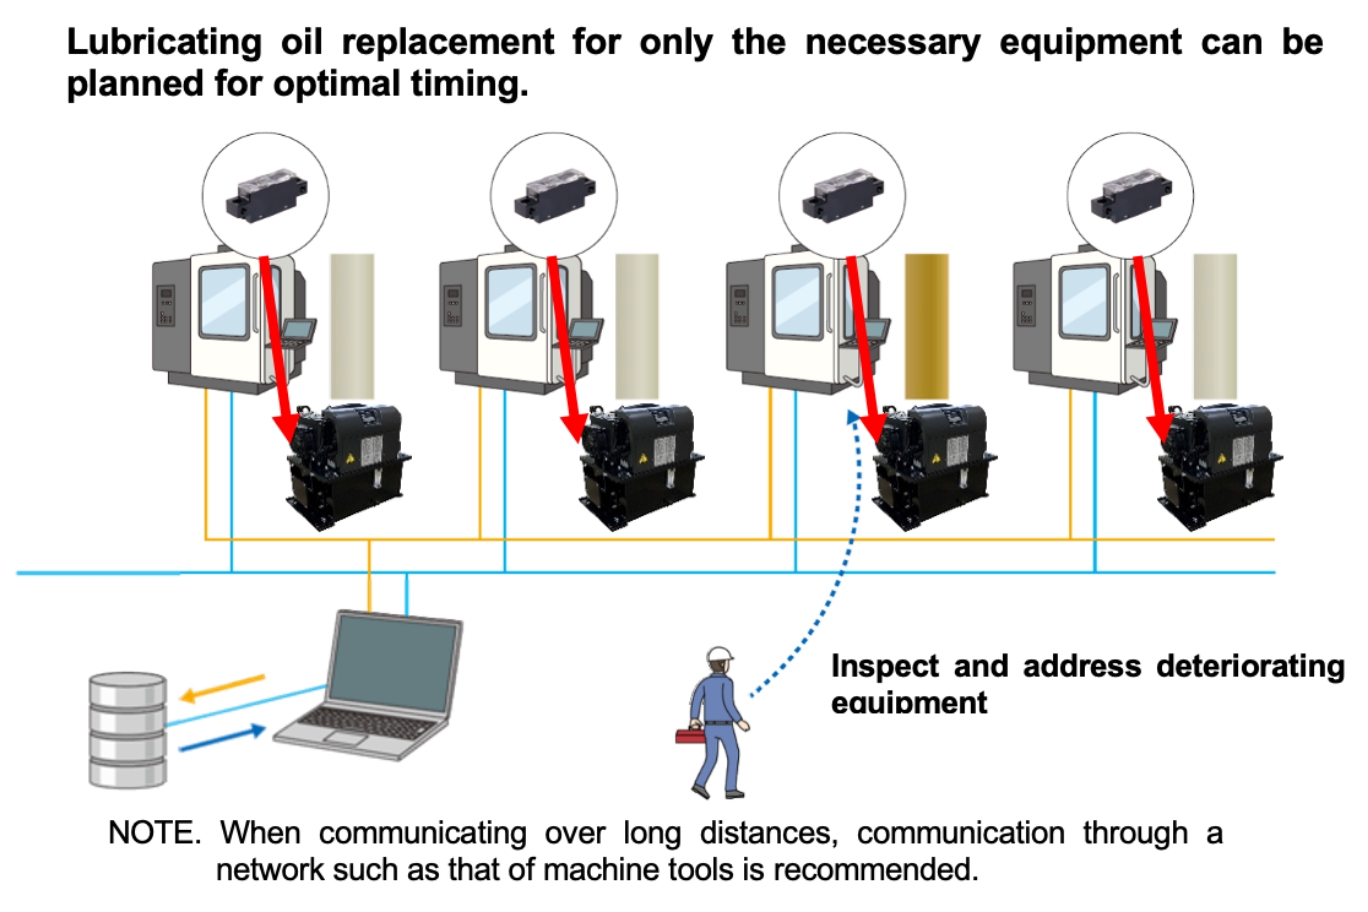 Lubricating oil replacement for only the necessary equipment can be planned for optimal timing.